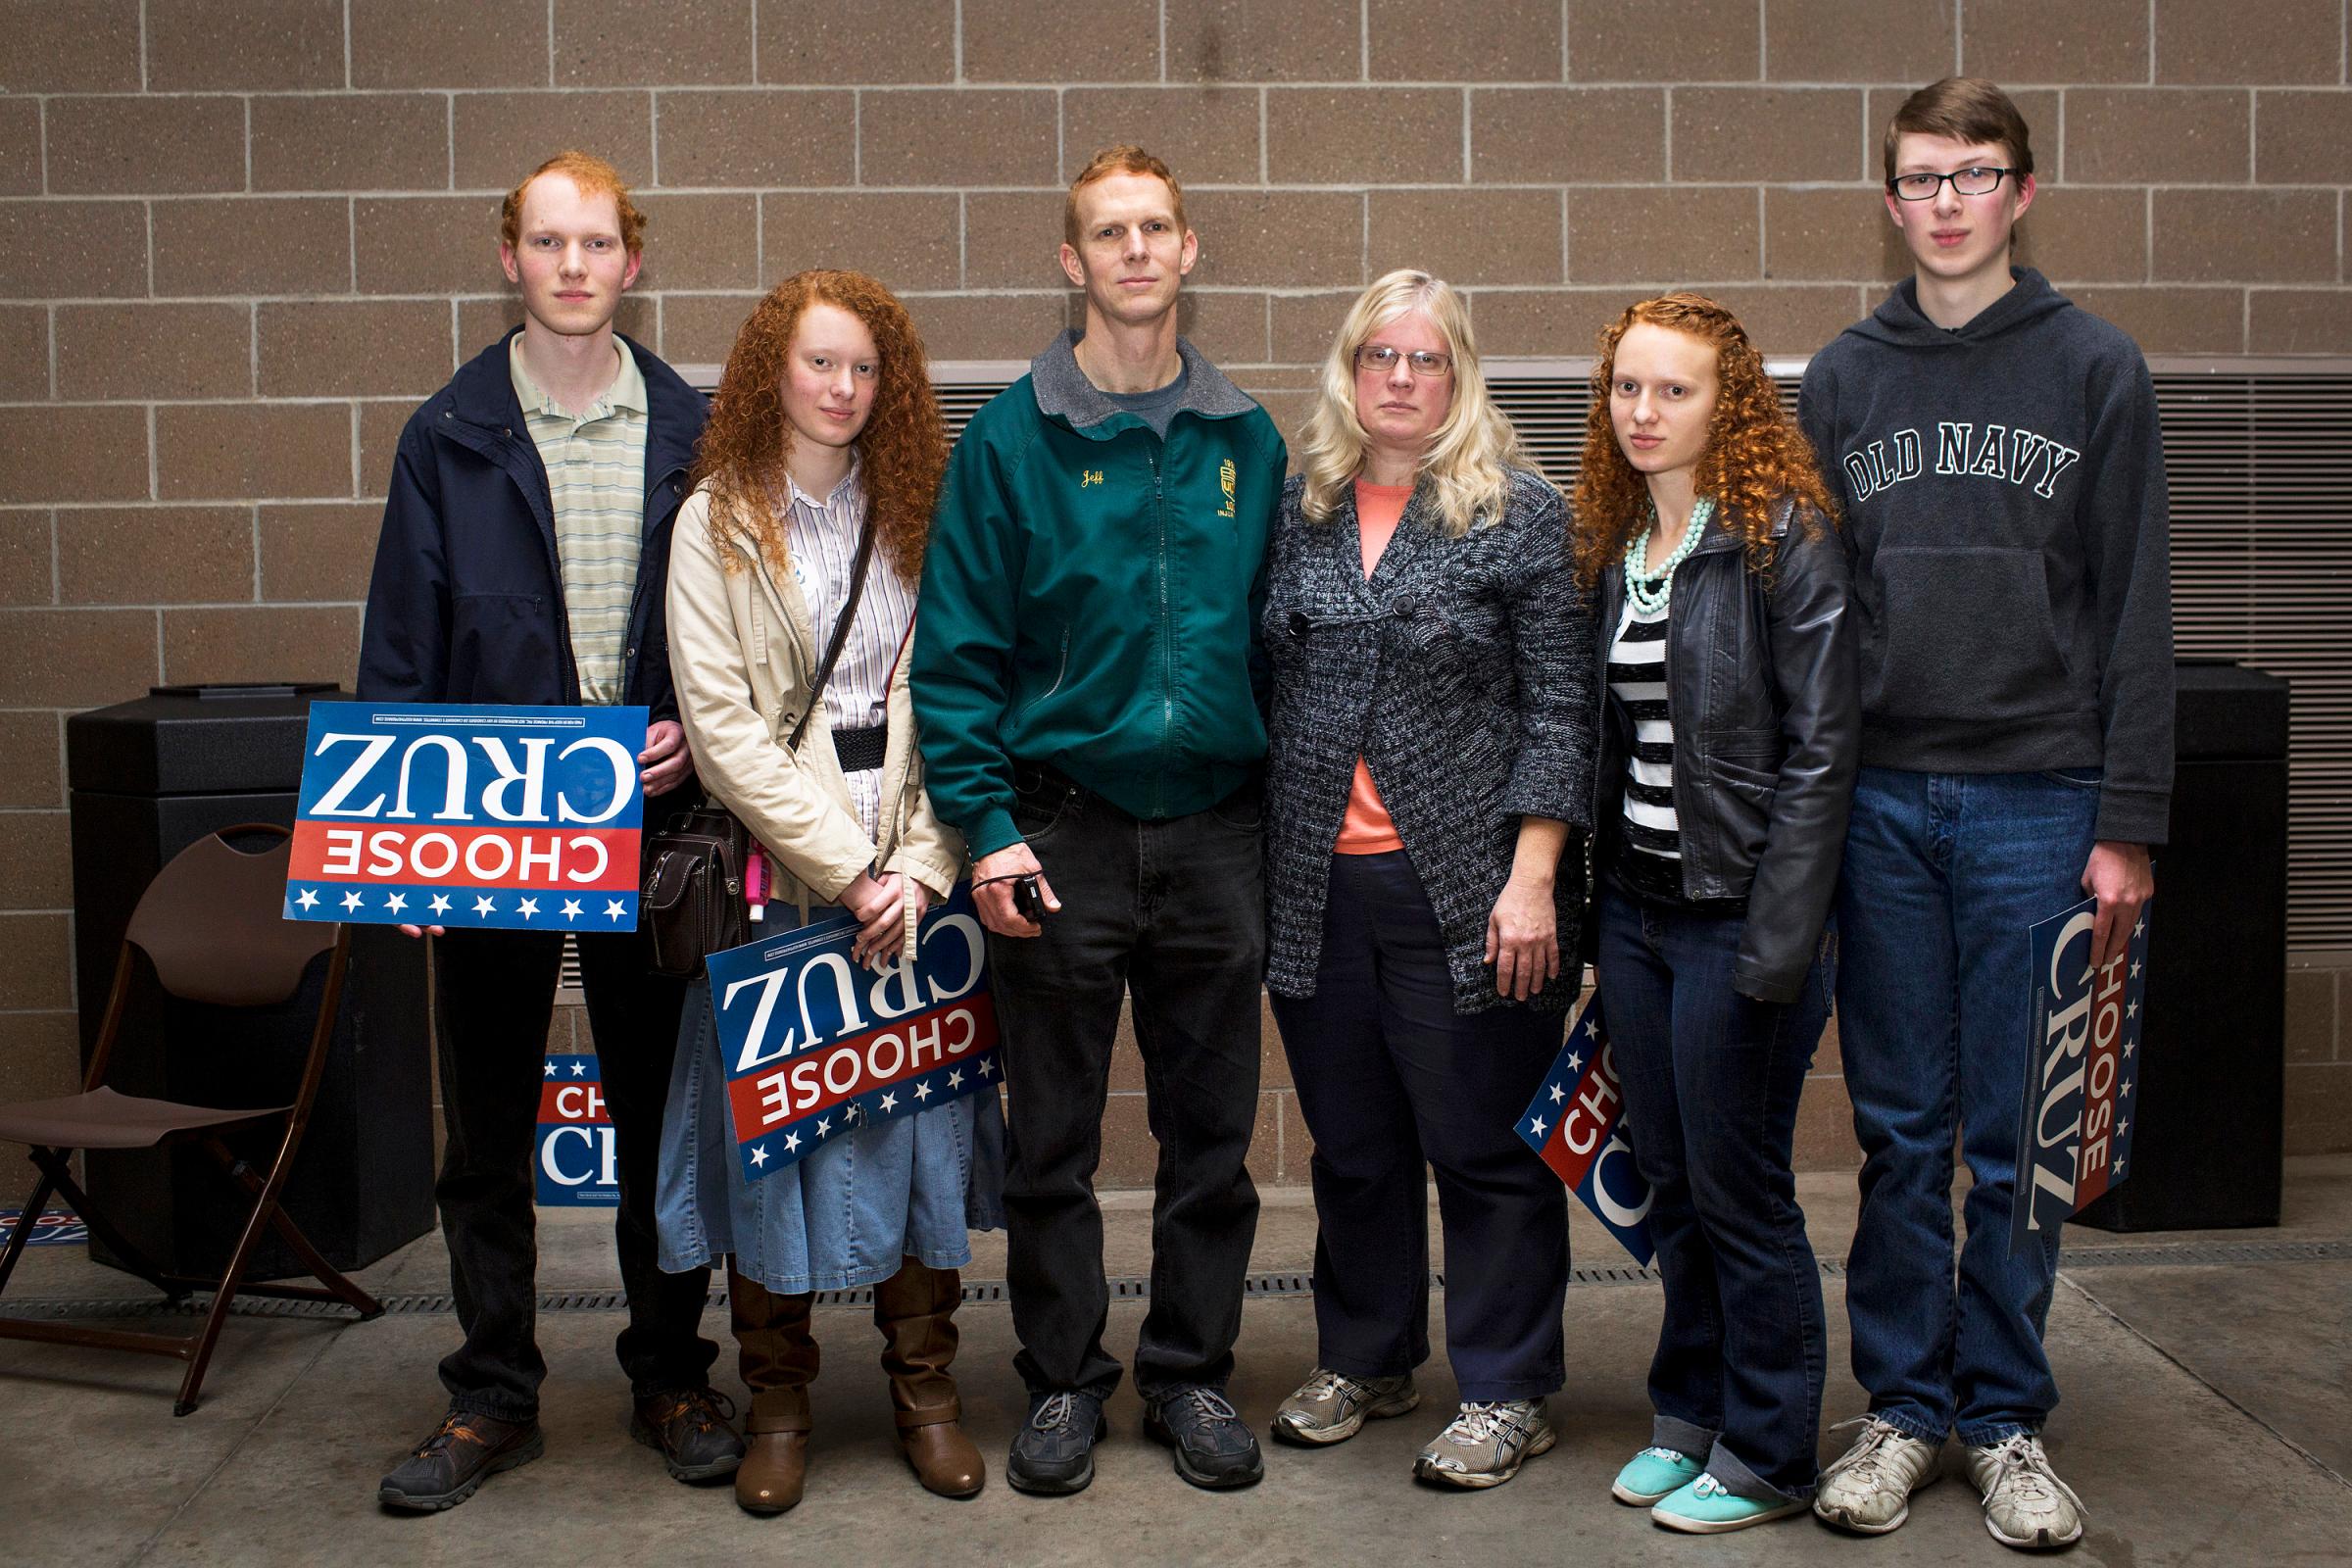 Supporters attend a rally for Ted Cruz in Des Moines, Iowa on Jan. 31, 2016. From left, Joseph, Jennifer, Jeff, Kim, Jessica and Josiah Stilwell pose for a family portrait after the rally. Jeff, the father of the family, said "Ted Cruz is solid in God. He doesn't just say it, or sigh bills, he fights for what he believes. He brings the fight to the battlefield, and that's what we need. He knows he's going to heaven. He's a true Christian. Without God we're nothing. There are absolutely moral wrongs and rights and he's fighting for what's right."